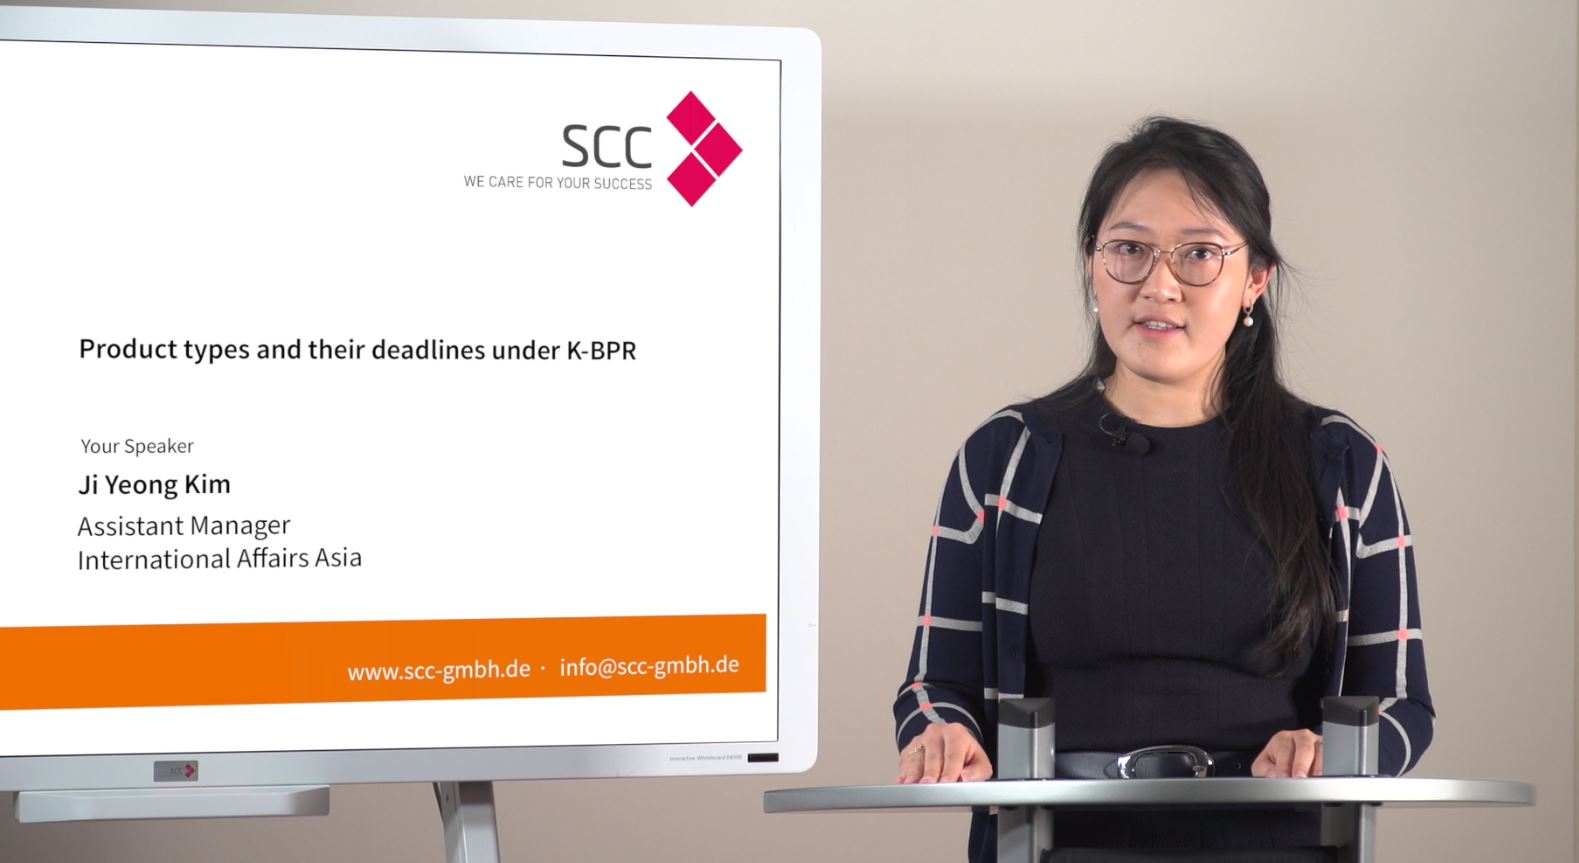 SCC video guidance on brexit